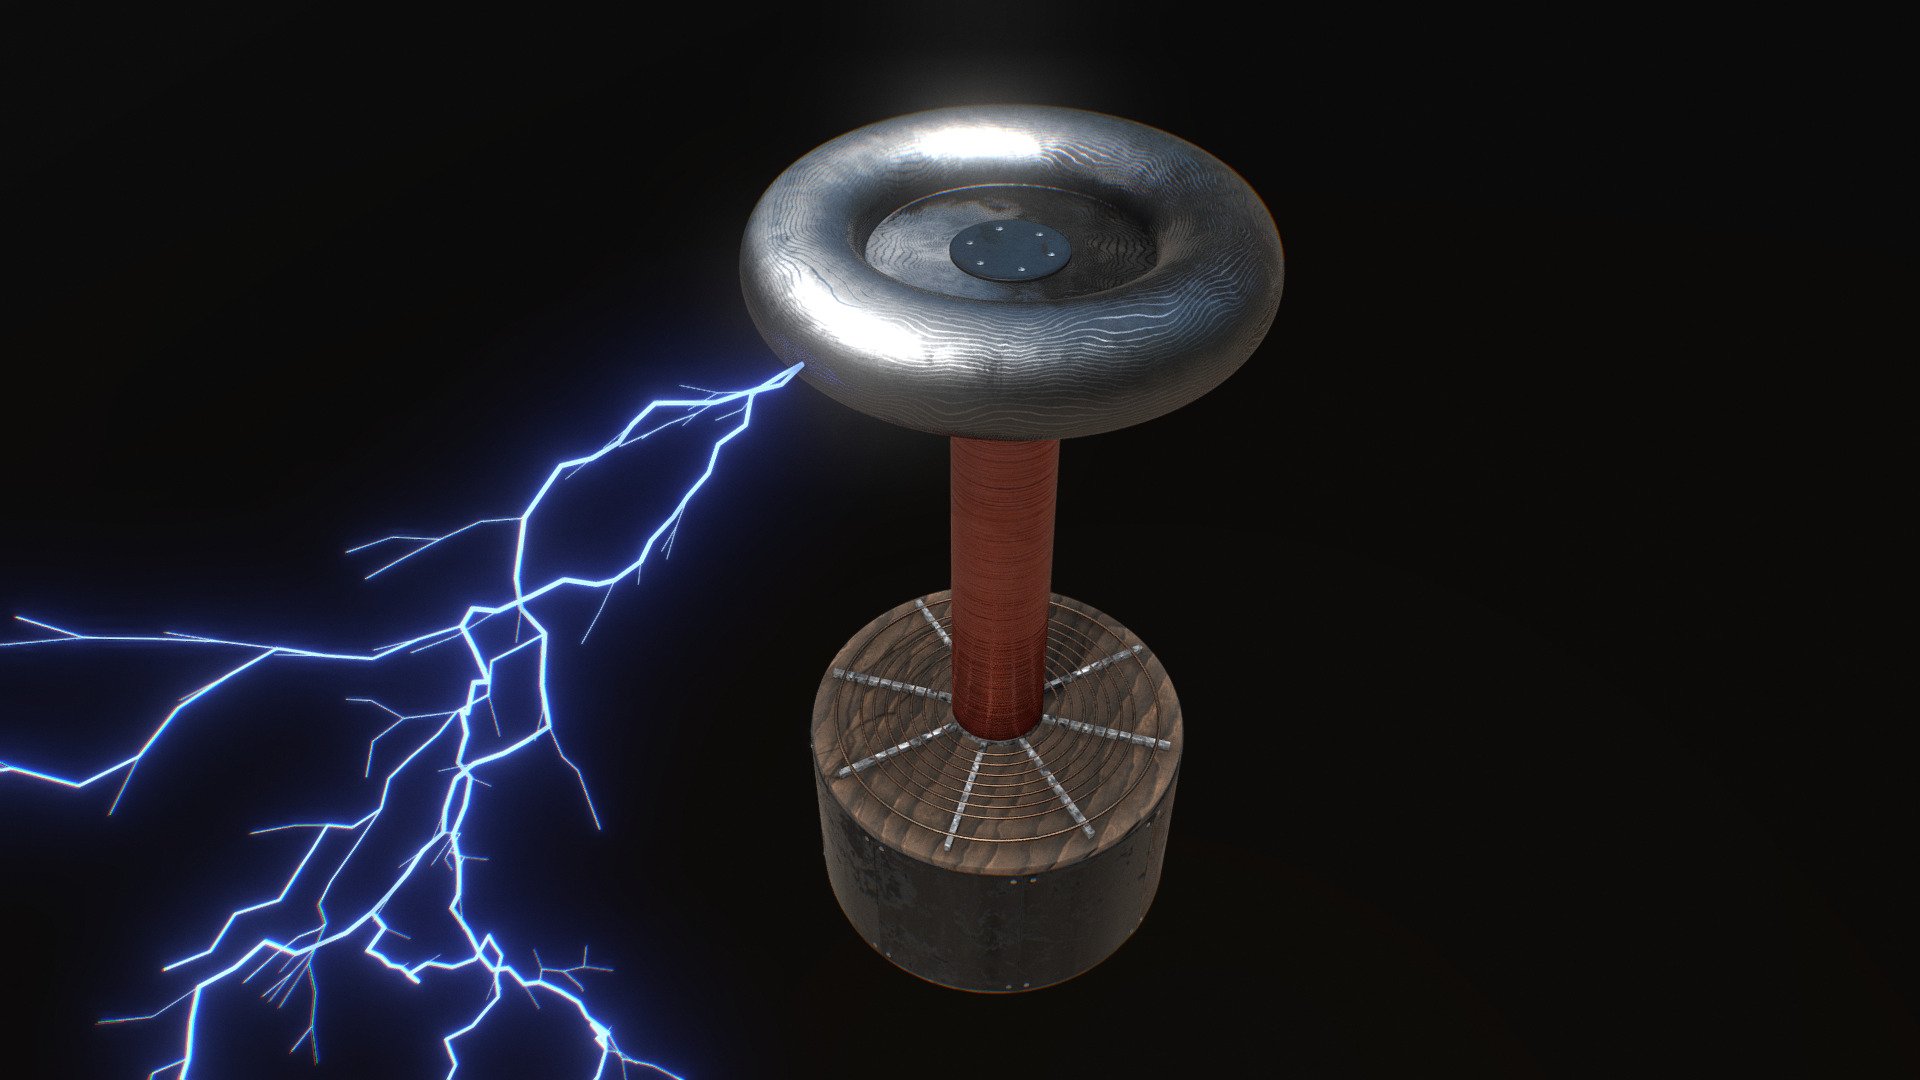 [Technical Information]




Height: 2.5 meters.

All geometry is subdivision ready (except for the Lightning Bolt).


Polycount at subdiv Lv. 0: 11,336

Polycount at subdiv Lv. 1: 31,904

Polycount at subdiv Lv. 2: 114,176



Fully unwrapped, non-overlapping UV's.

8K PBR Textures.

[Additional Files Included]

_TEX - 4K PBR Textures 16bit png files.

_TEX_8K - 8K PBR Textures 16bit png files.

_C4D_Octane - Cinema 4D project file with Octane shaders, using the PBR textures.

_ORBX - Octane Standalone Package.

_SPP - Substance Painter project file. 

_C4D - Cinema 4D project file with Physical/Standard shaders using the PBR textures

_FBX - Autodesk FBX.

_OBJ - OBJ/MTL, three versions: subdiv Lv. 0 / 1 / 2. 

_E3D - Ready to use in Video Copilot's Element 3D, plus an After Effects project file with the model already loaded.

_MAX - 3ds Max project file with default shaders, using the PBR textures. May need adjustments.

If you have any questions or requests, dont hesitate to get in touch 3d model